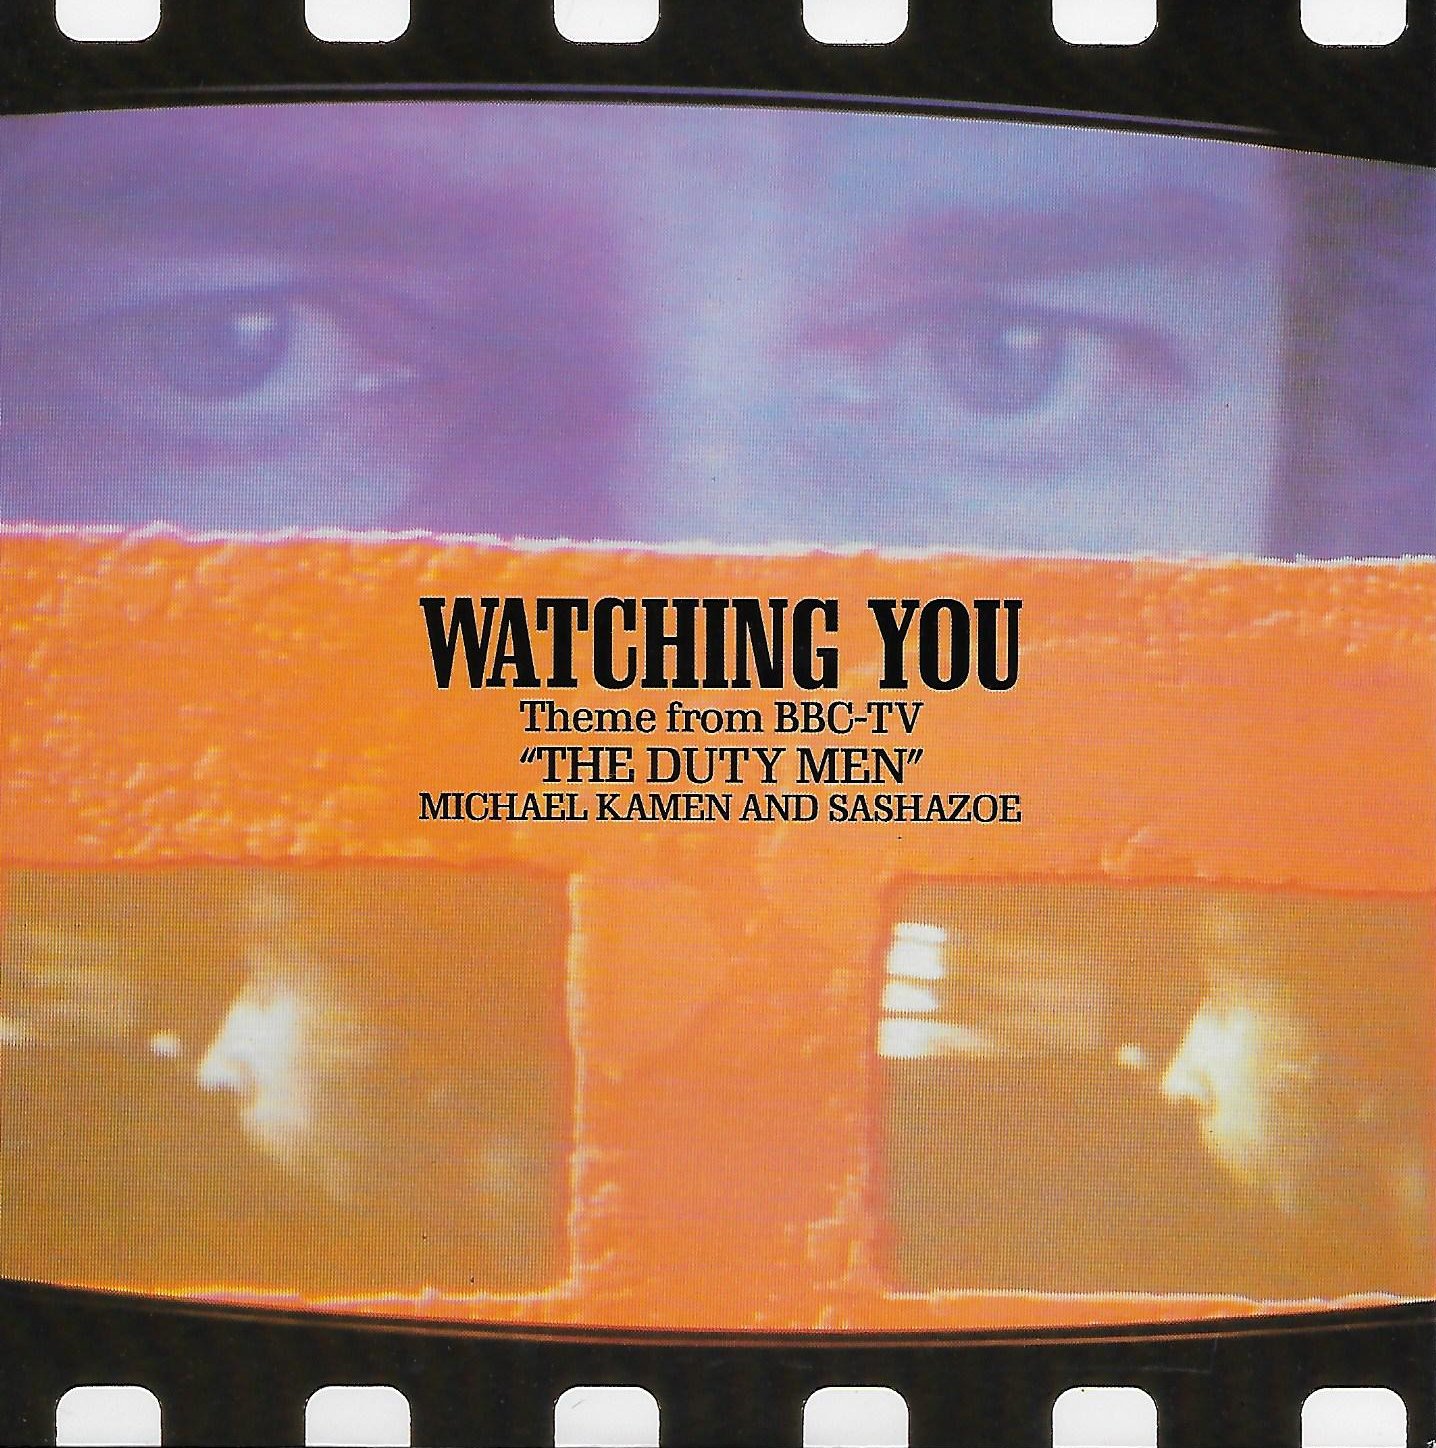 Picture of Watching you (The duty men) by artist Michael Kamen and Sashazoe from the BBC singles - Records and Tapes library